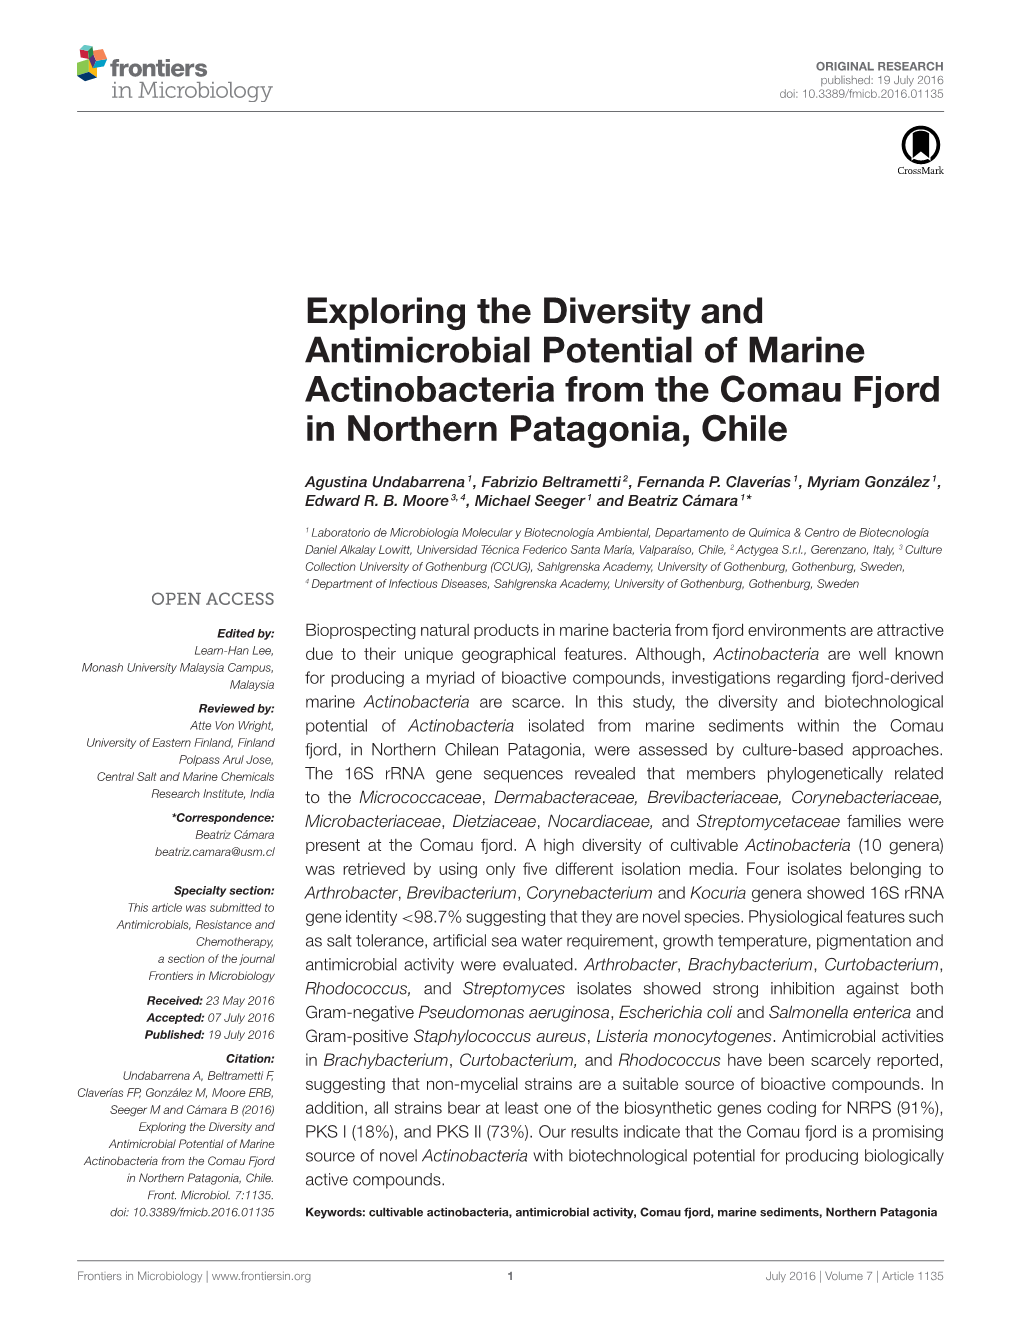 Exploring the Diversity and Antimicrobial Potential of Marine Actinobacteria from the Comau Fjord in Northern Patagonia, Chile